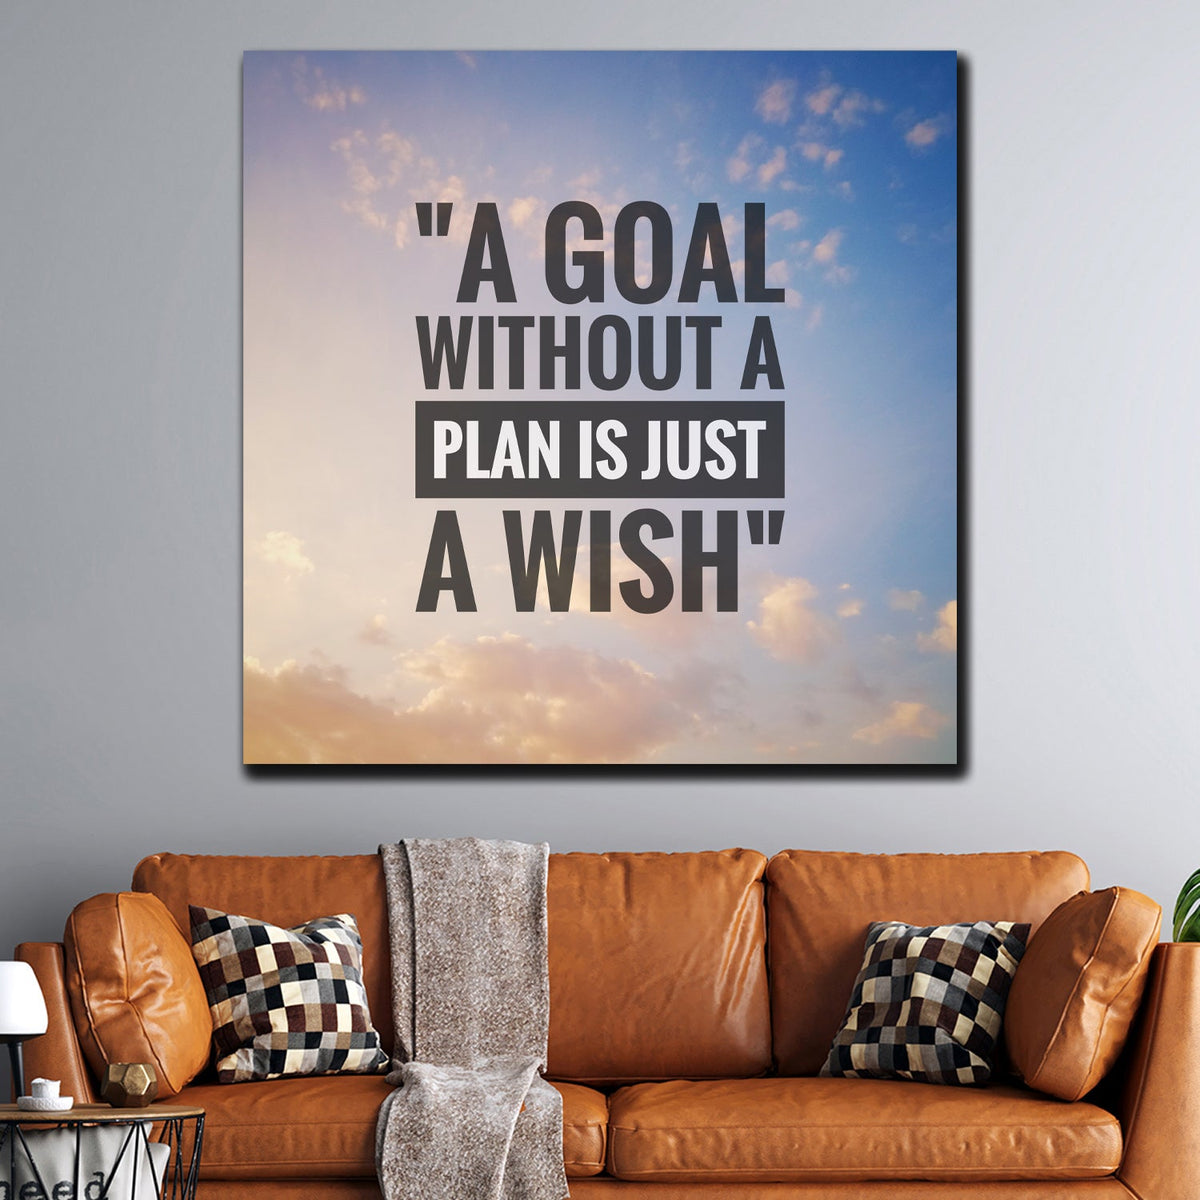 https://cdn.shopify.com/s/files/1/0387/9986/8044/products/GoalwithoutaPlanCanvasArtprintStretched-1.jpg